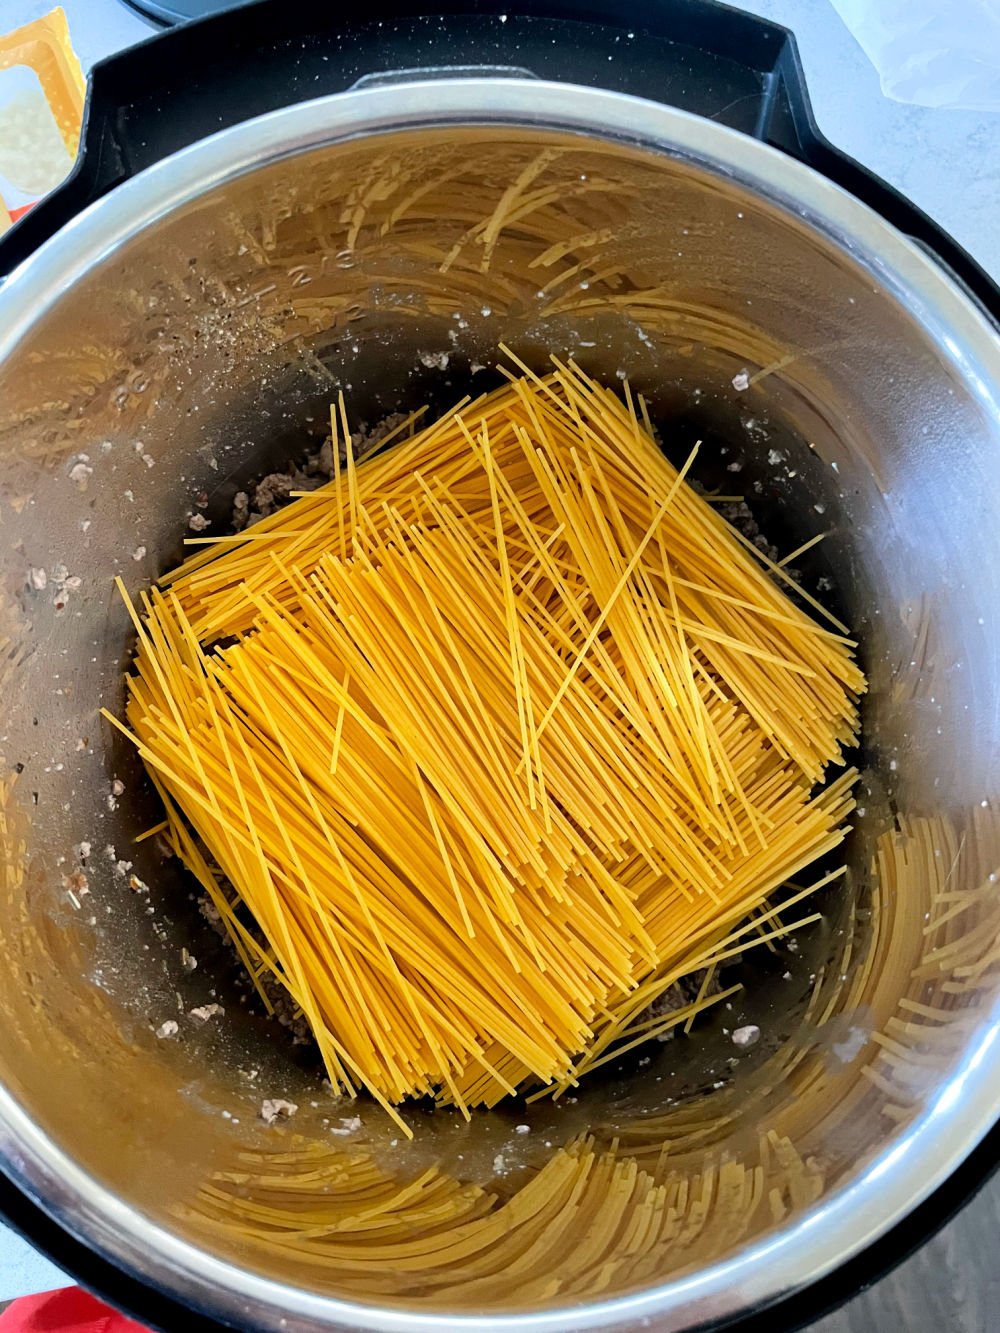 Spaghetti Noodles broken in half and placed in criss cross pattern in bottom of the Instant Pot